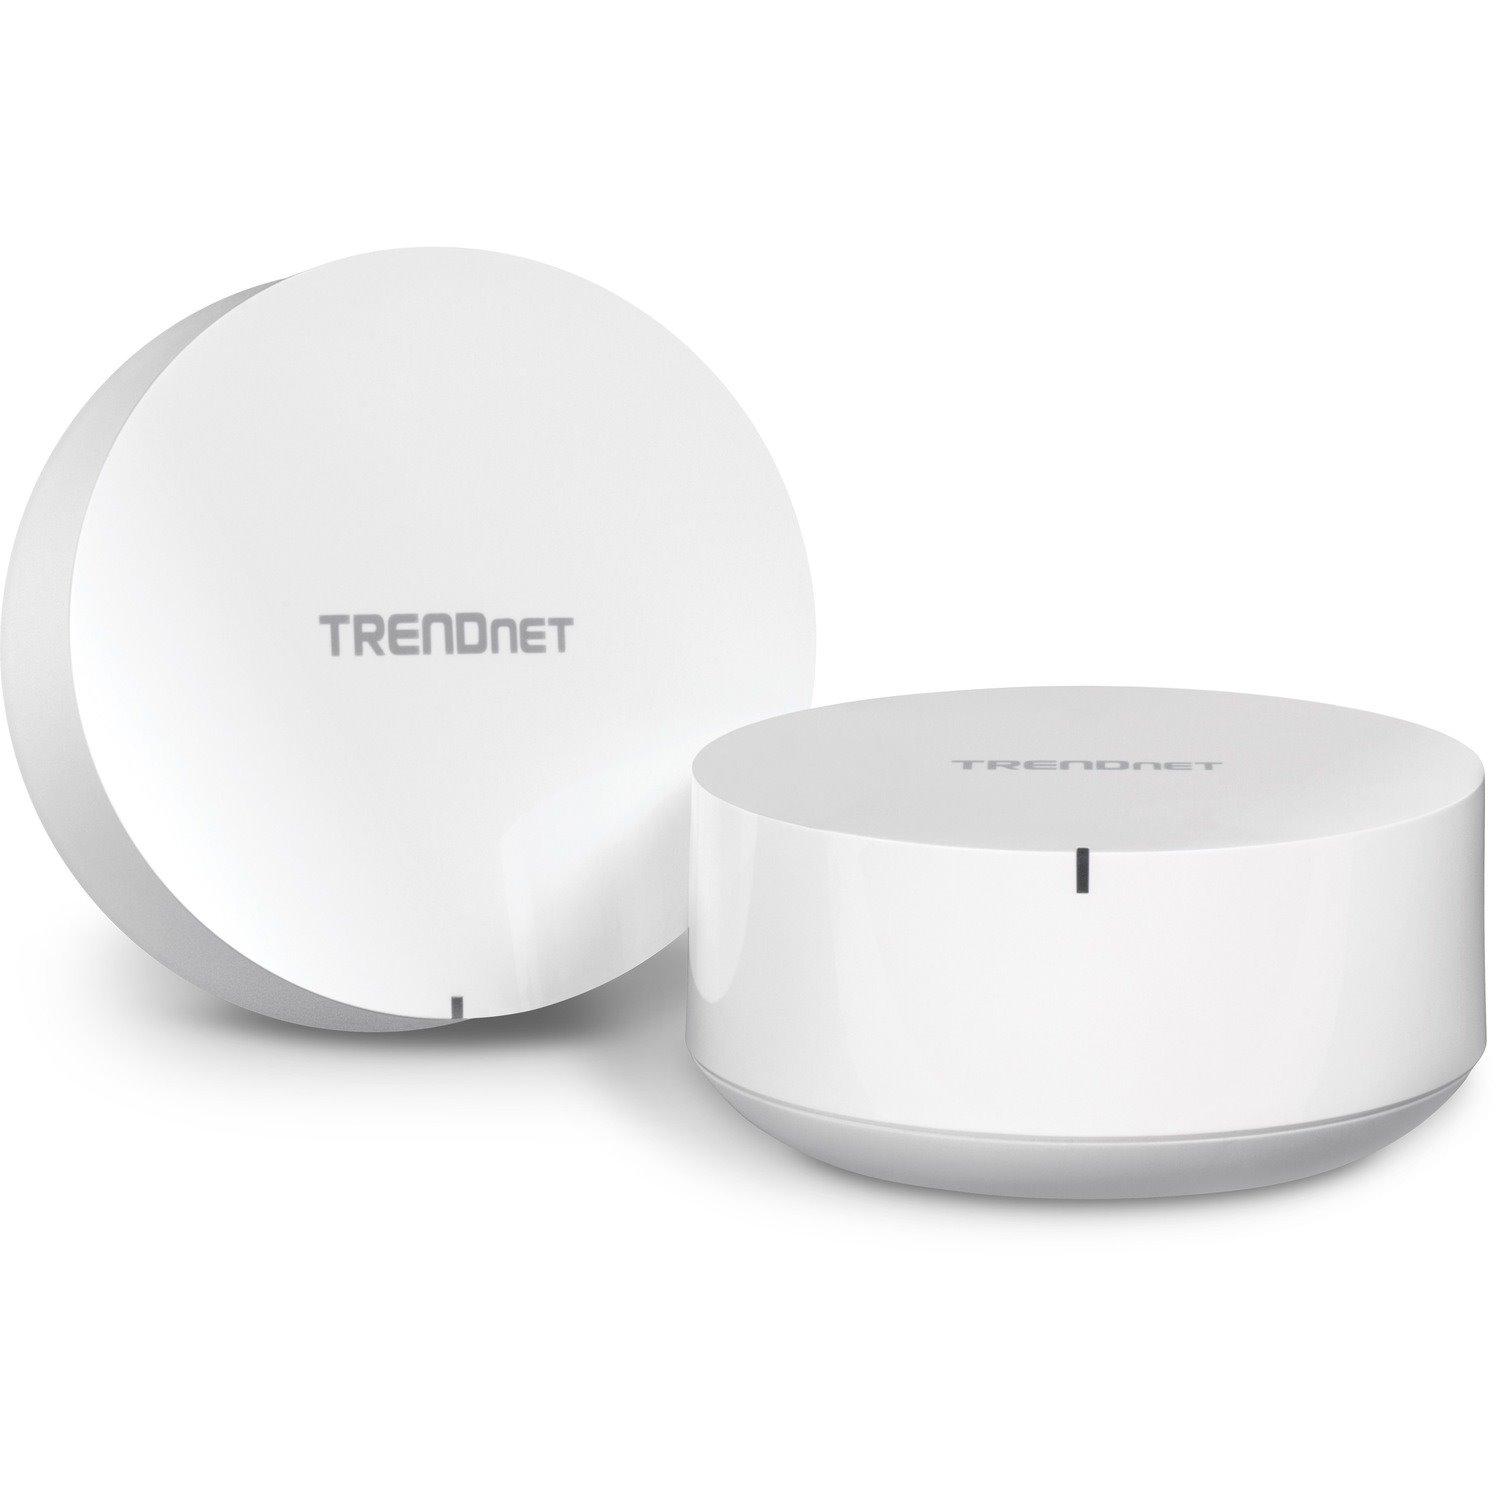 TRENDnet TEW-830MDR2K,2 x AC2200 WiFi Mesh Routers, App-Based Setup, Expanded Home WiFi(Up to 4,000 Sq Ft. Home),Supports 2.4Ghz/5G